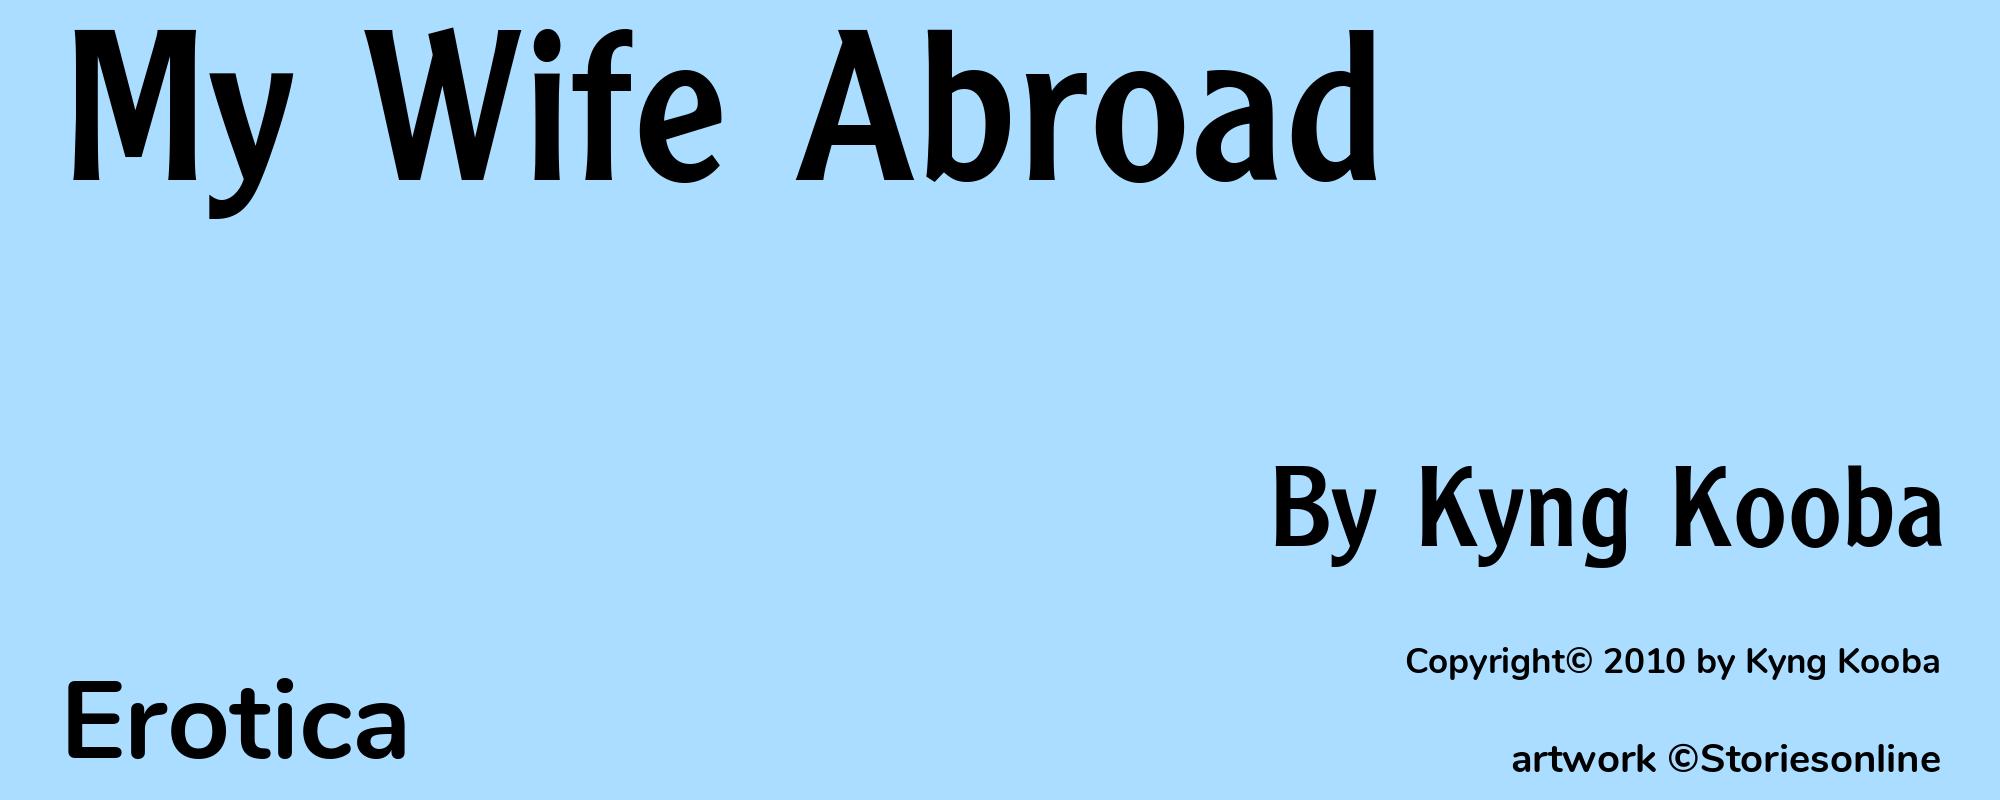 My Wife Abroad - Cover